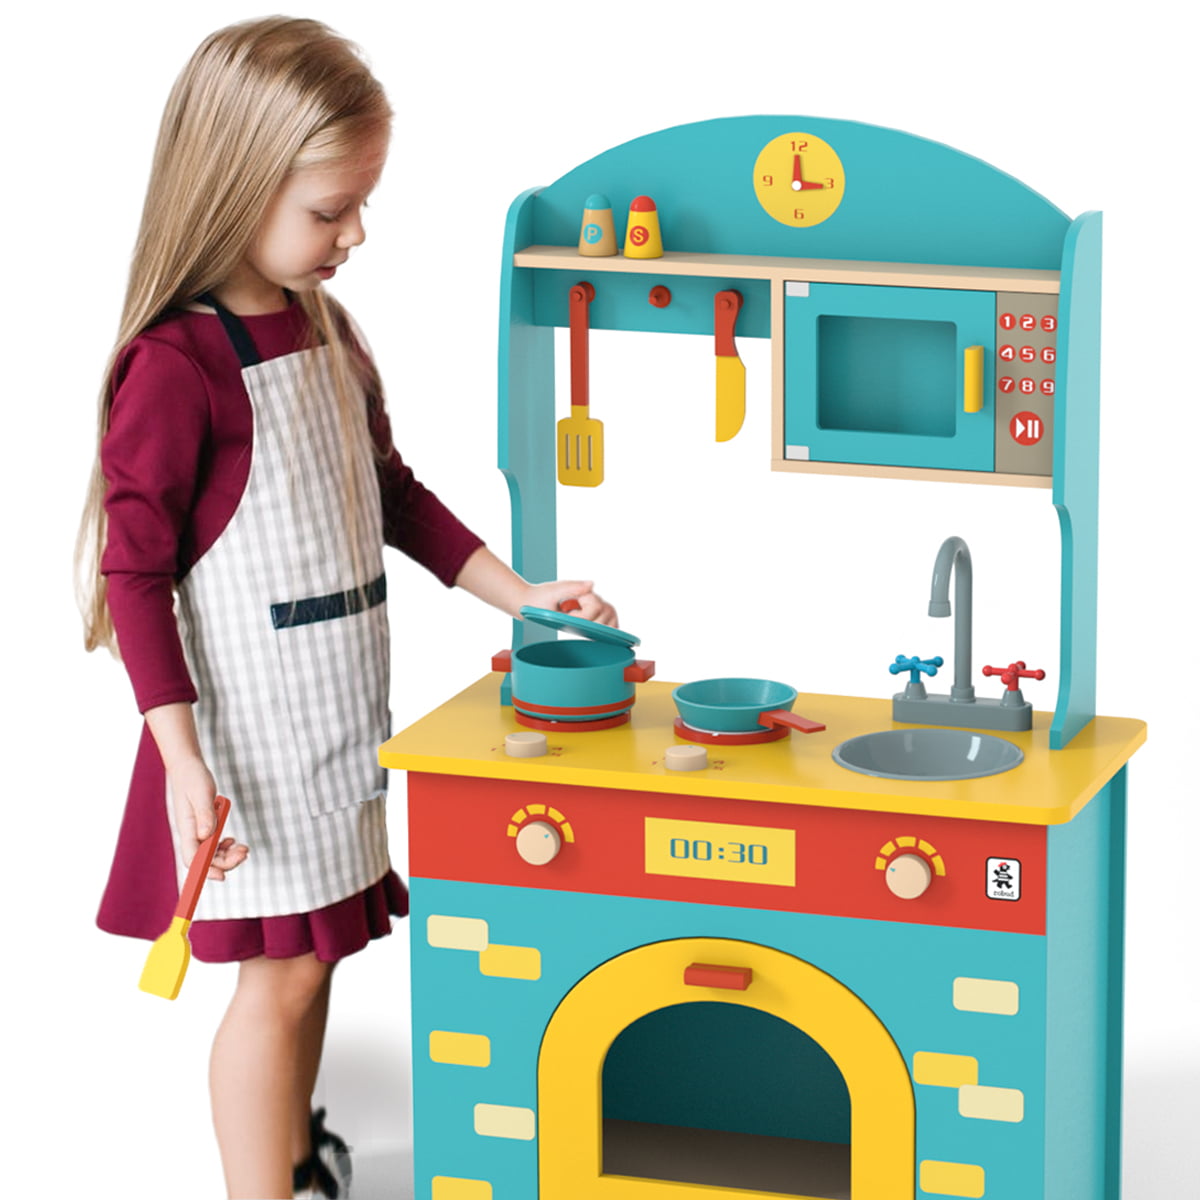 33Pcs Cooking Chef Pretend Play Kit Kitchen Toy Set Christmas Gift For Girl Boy 